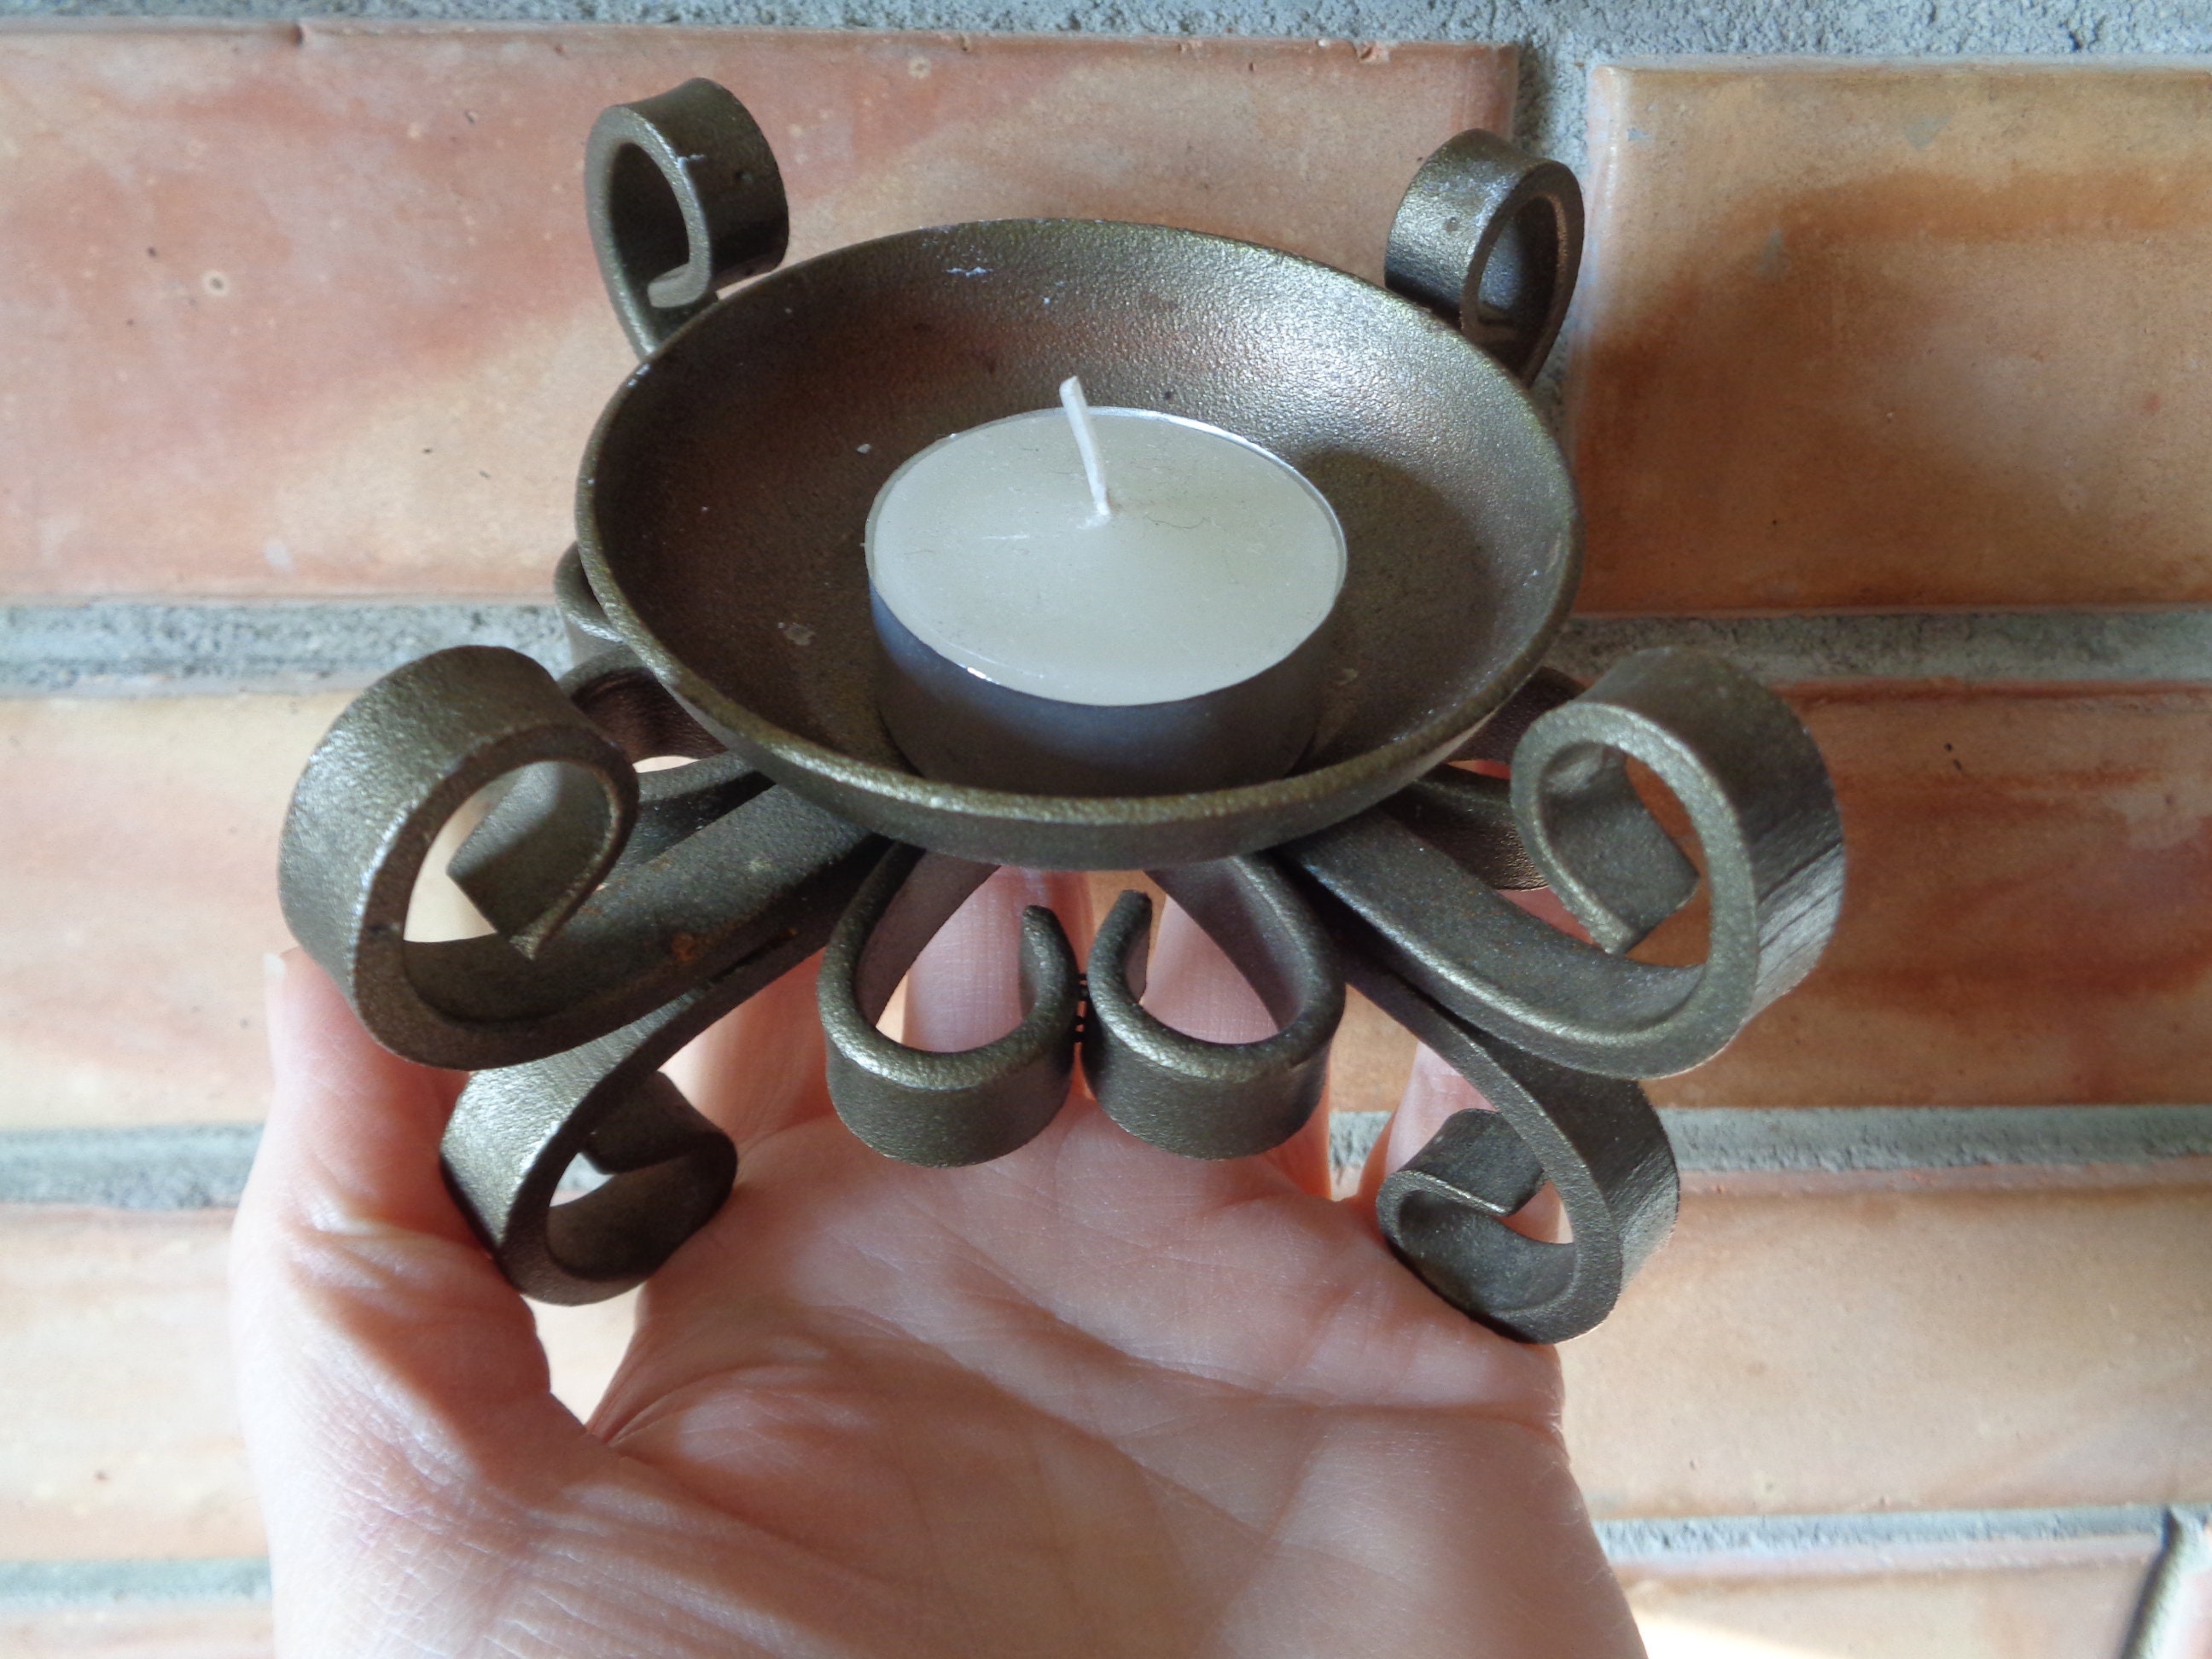 Olive Wood Tealight Candle Holders Set /candlestick Holders